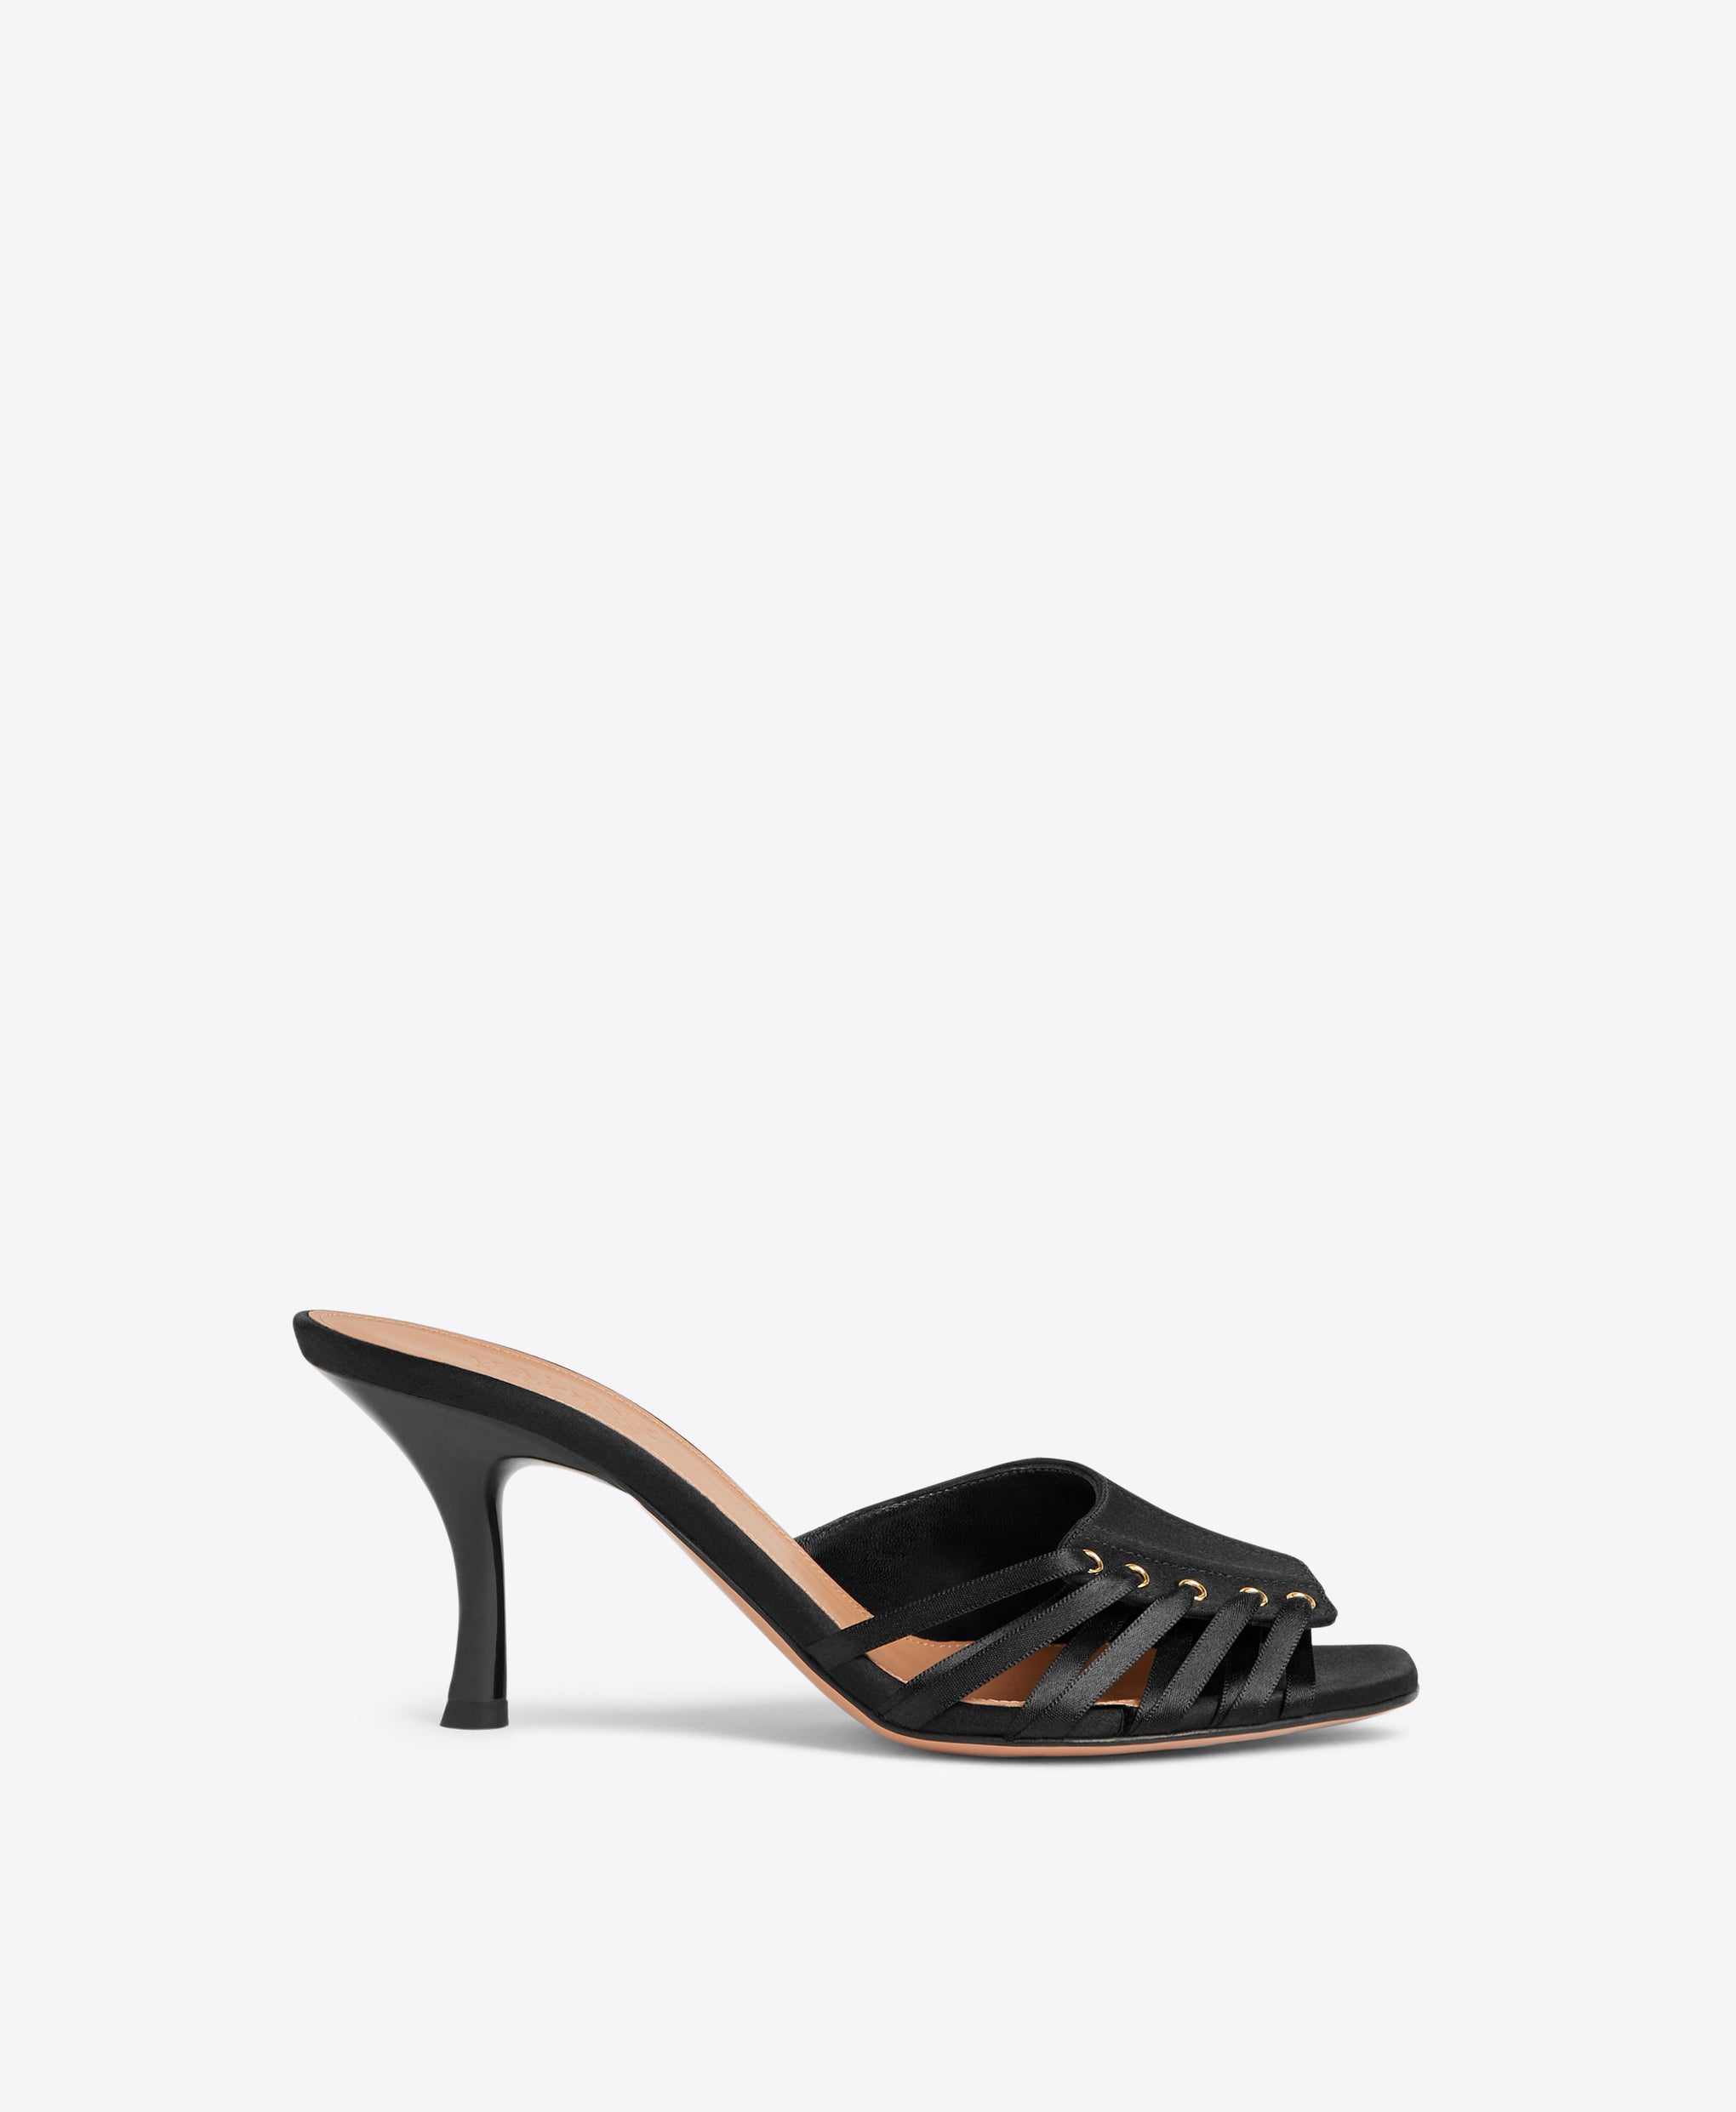 Malone Souliers Bexley 70 Black Satin Heeled Sandals